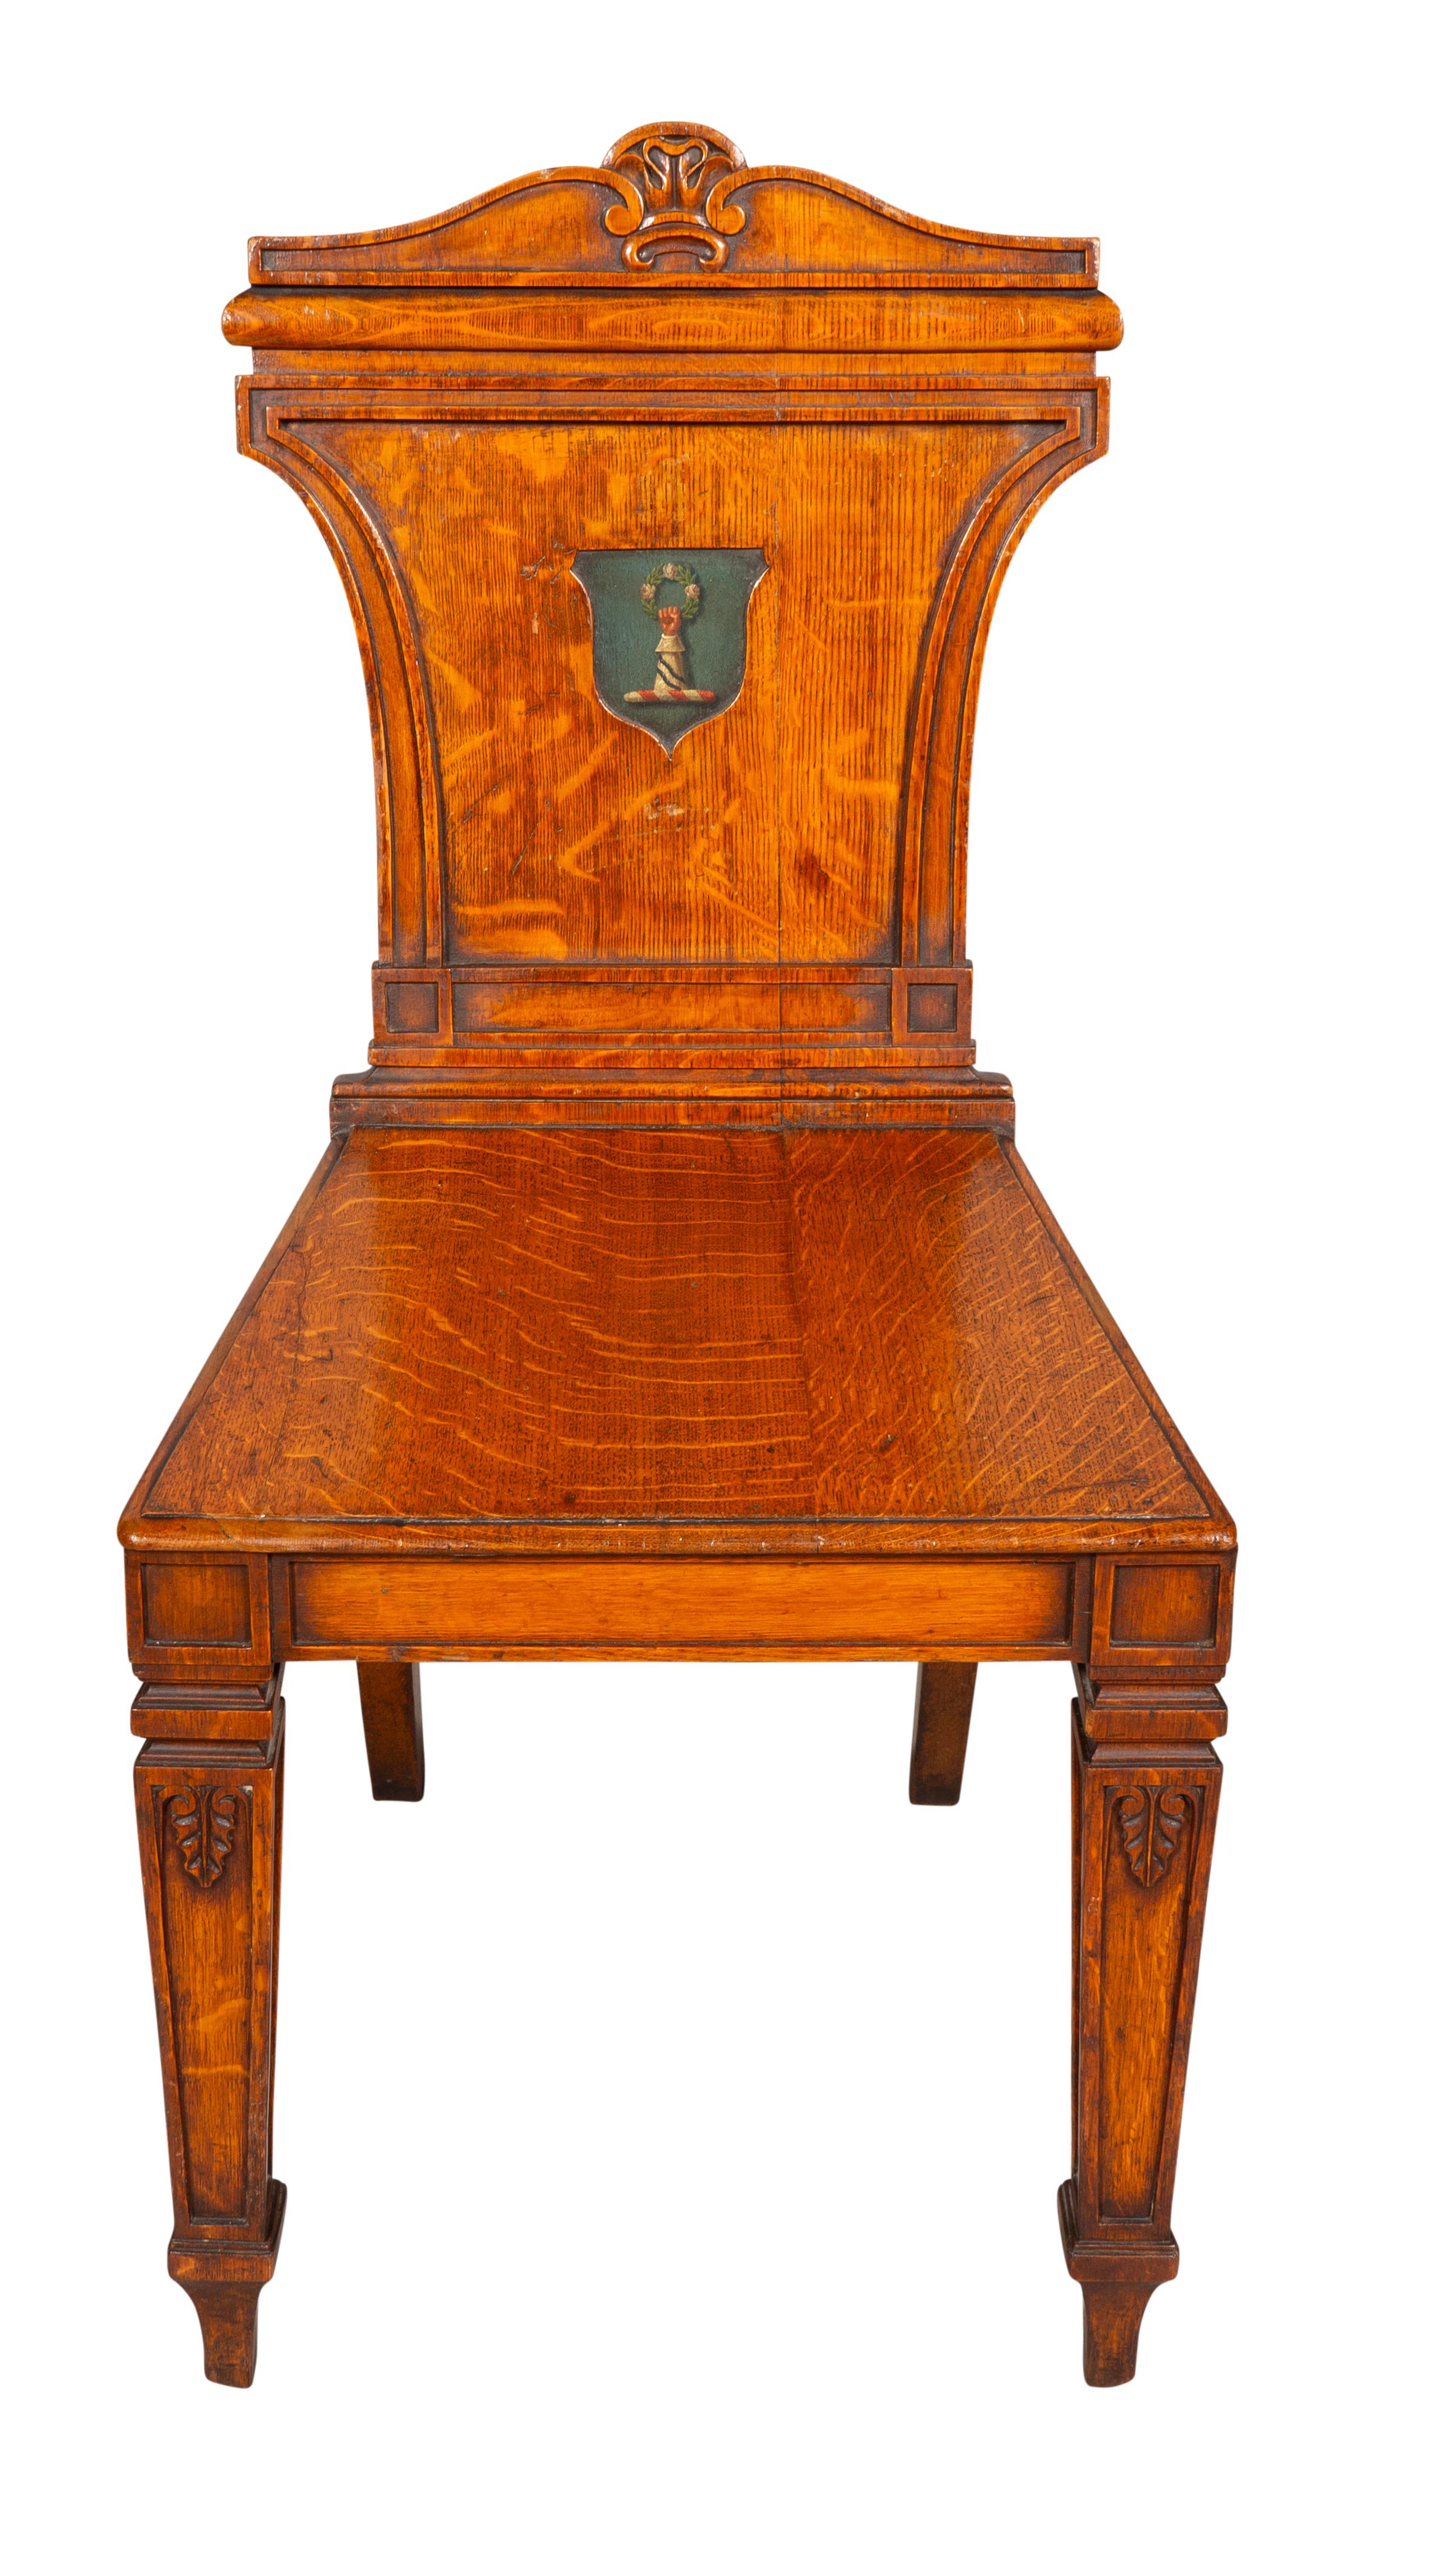 Each with a rectangular back and arched crest over a painted coat of arms, wood seat raised on square section tapered legs.